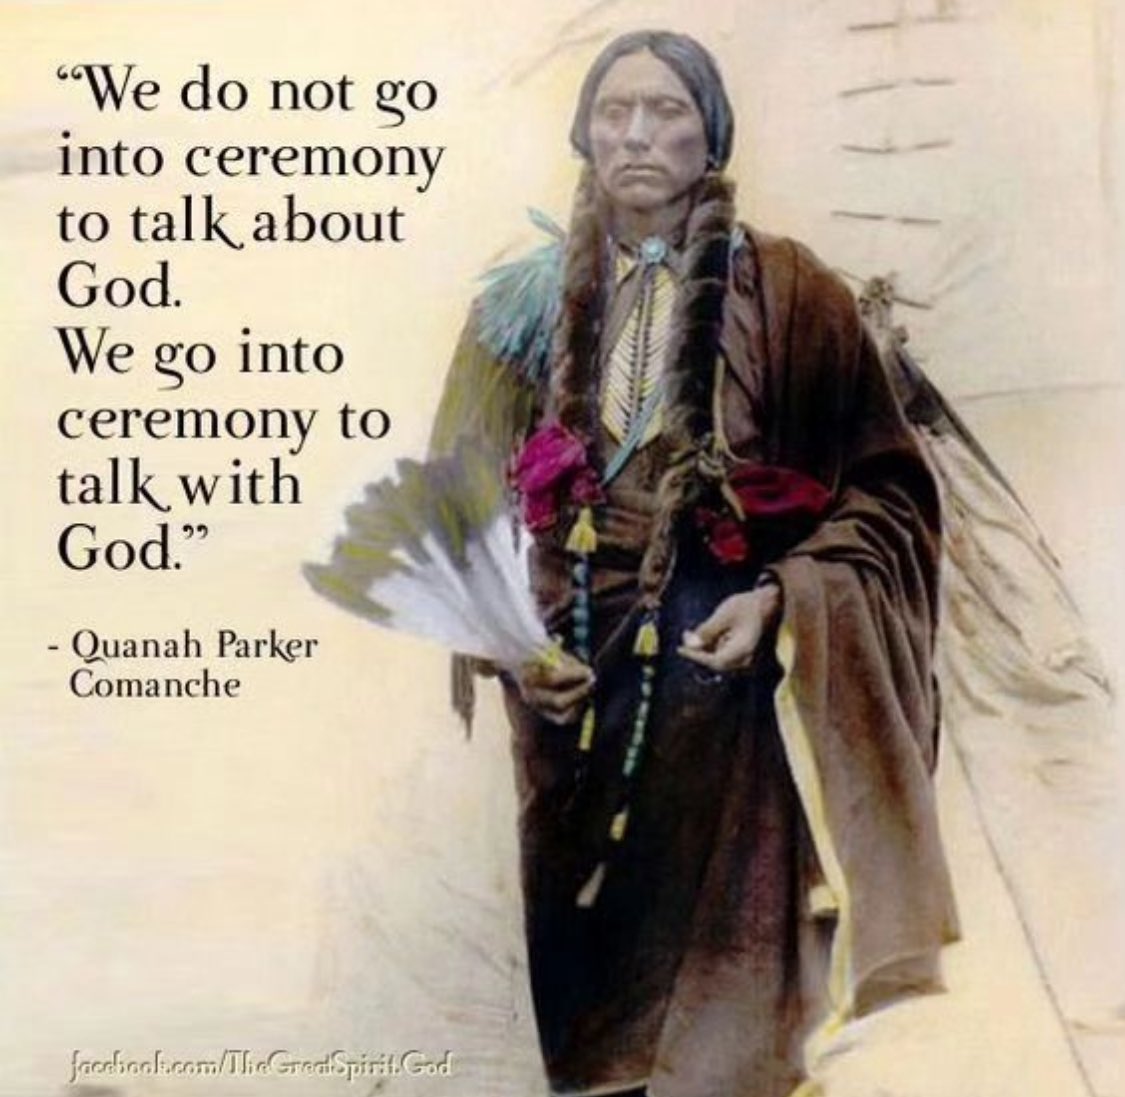 'We do not go into ceremony to talk about God. We go into ceremony to talk with God.' - Quanah Parker, Comanche